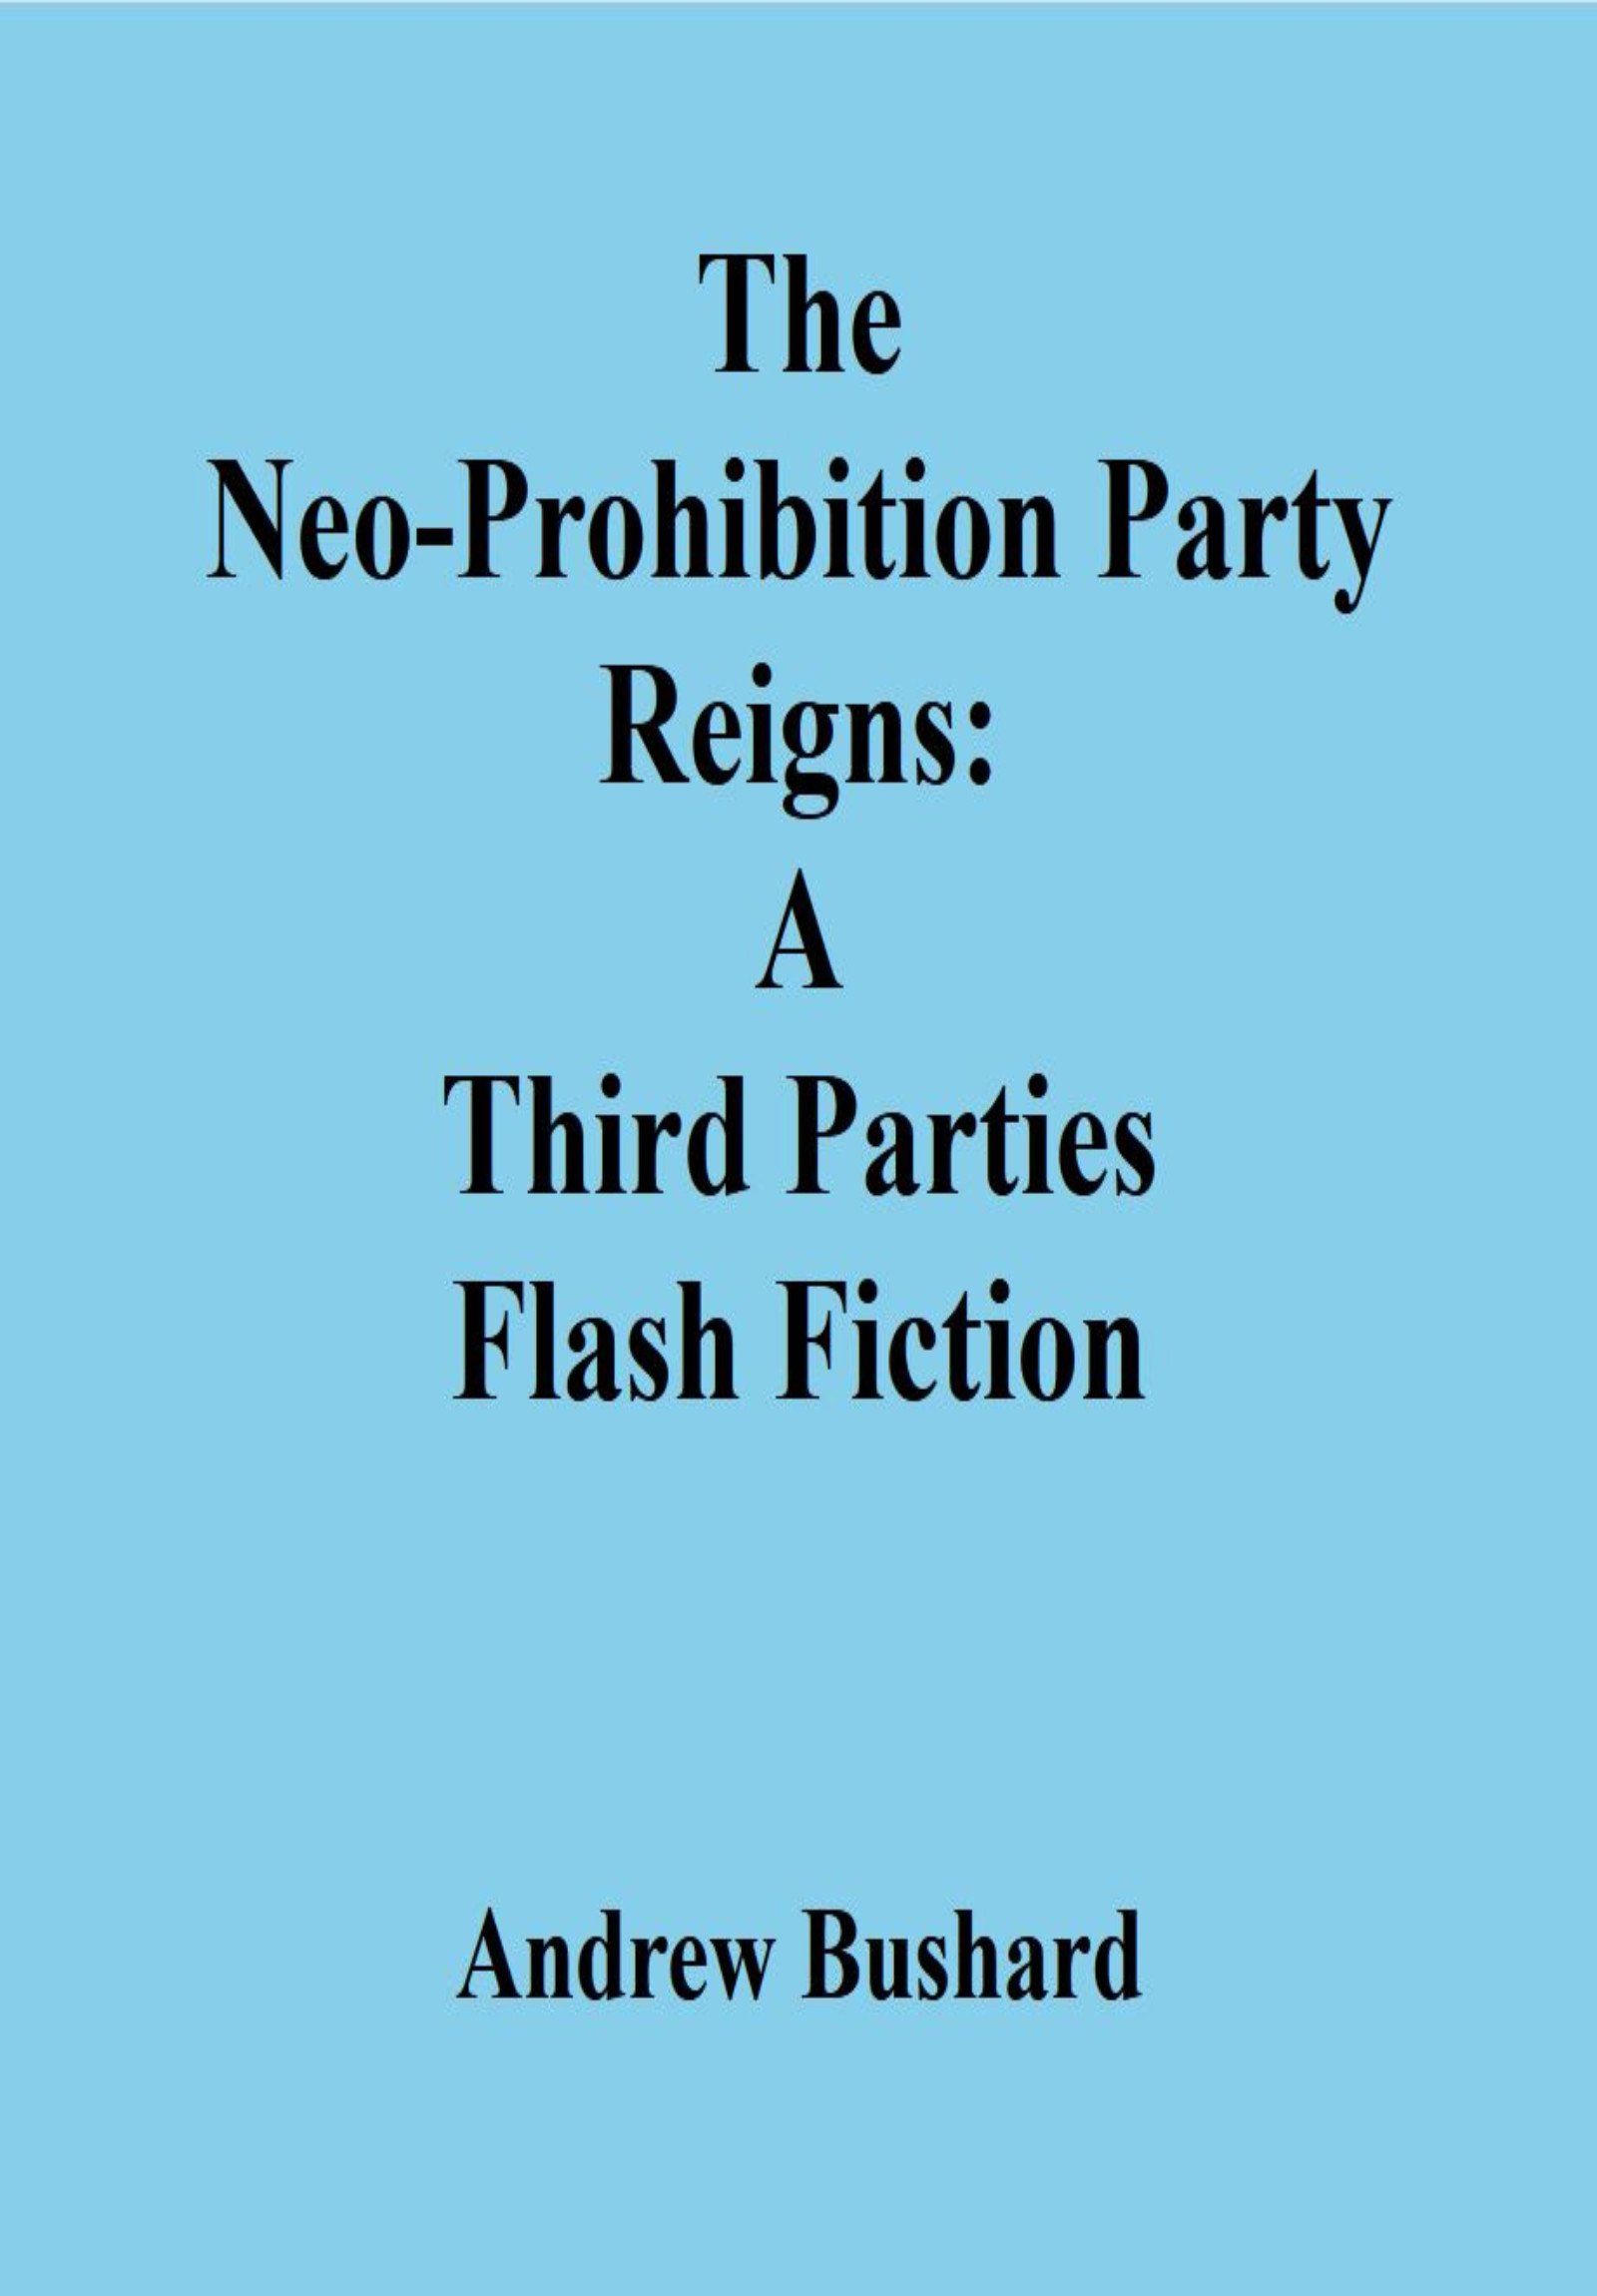 The Neo-Prohibition Party Reigns